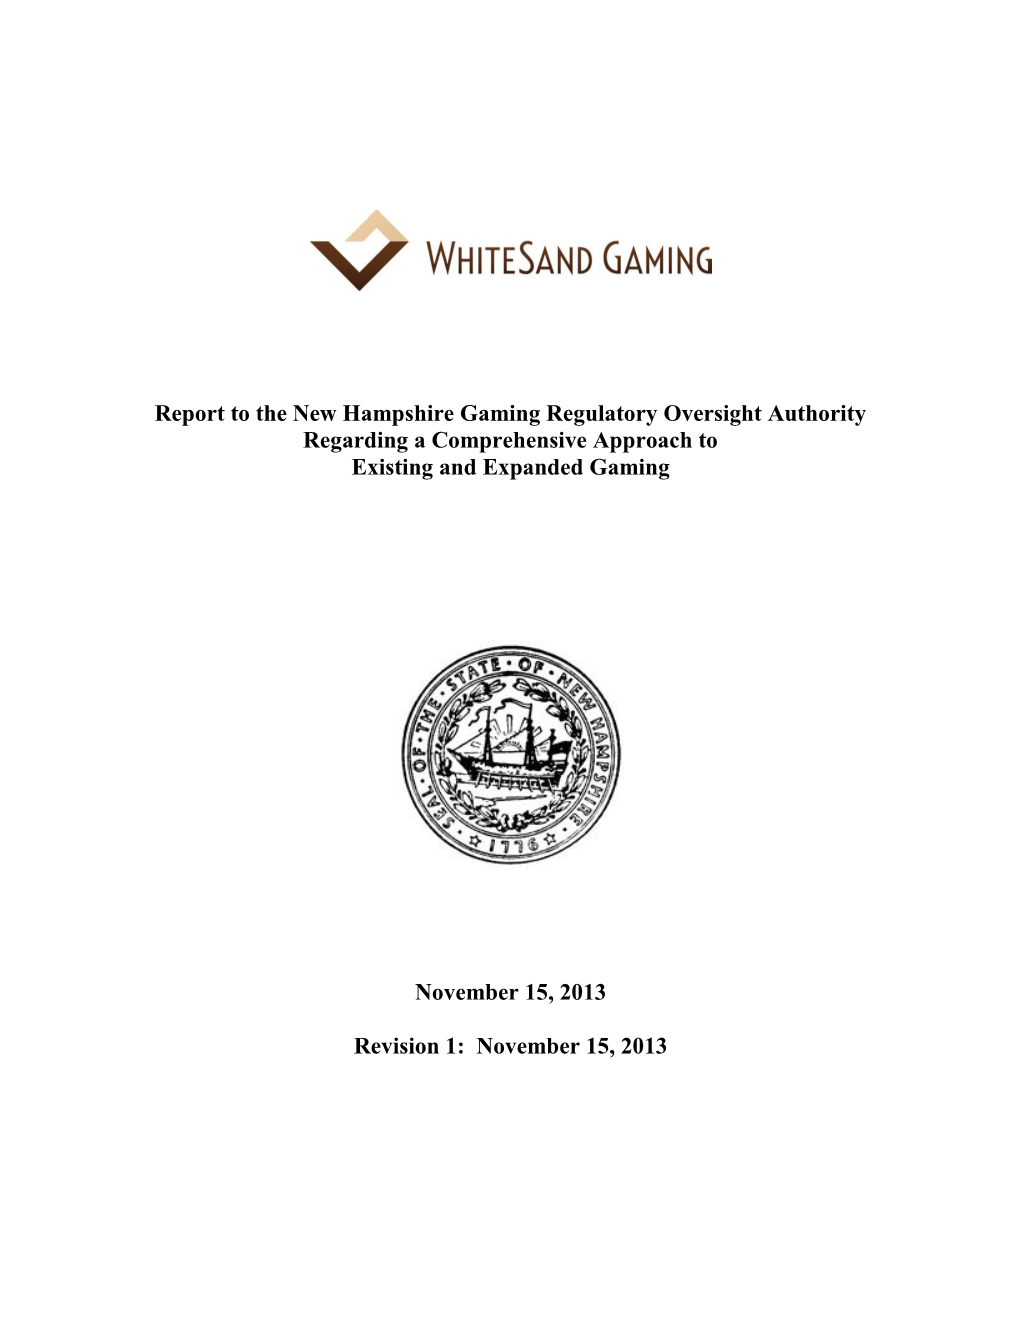 Report to the New Hampshire Gaming Regulatory Oversight Authority Regarding a Comprehensive Approach to Existing and Expanded Gaming